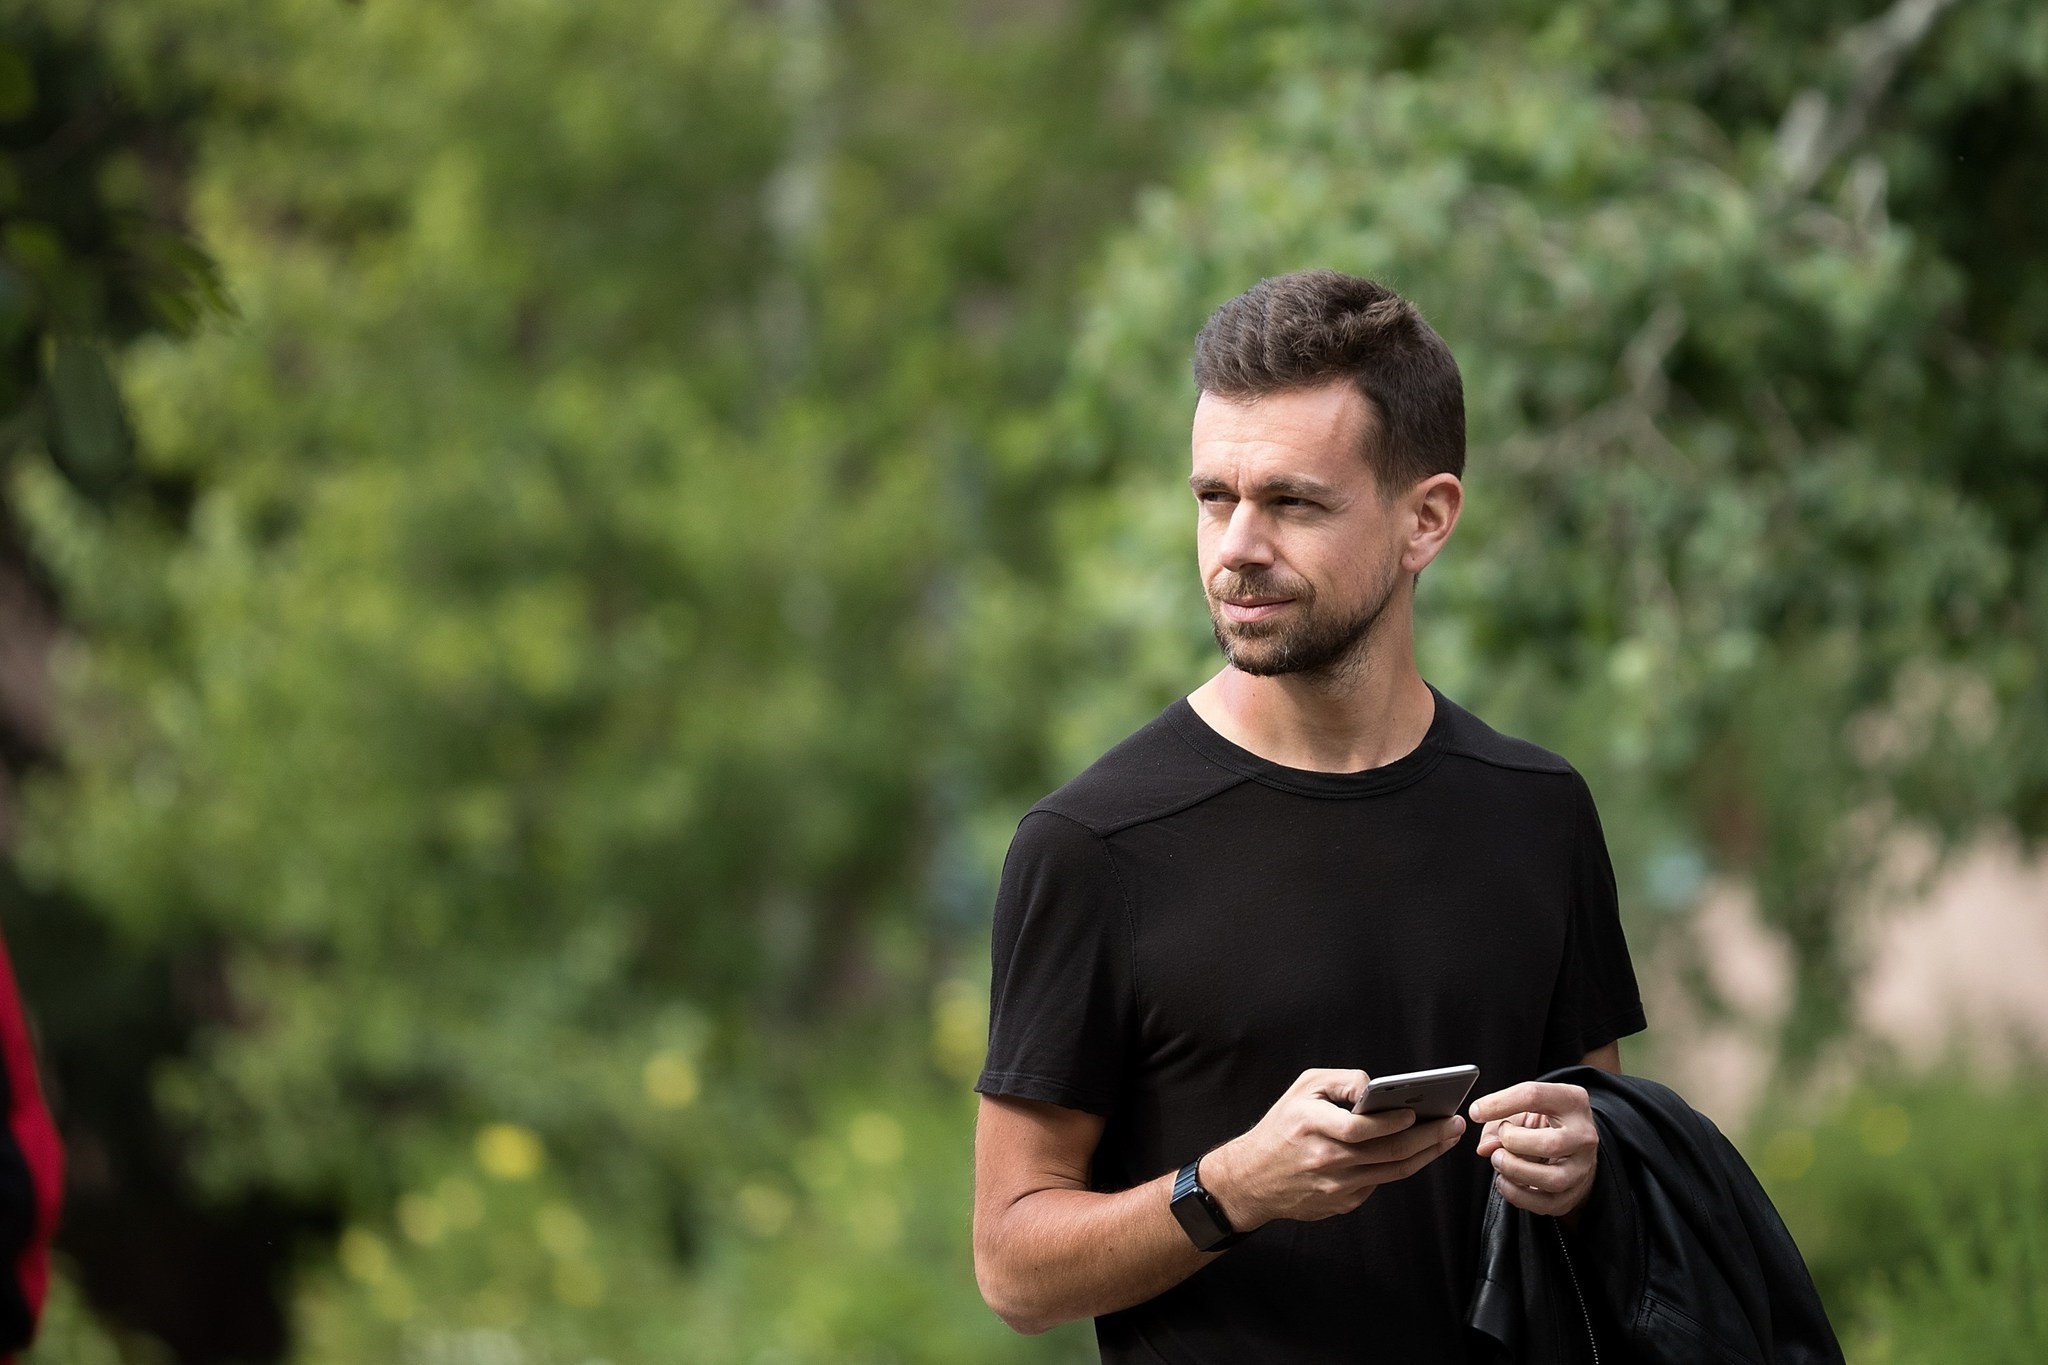 Jack Dorsey, co-founder and chief executive officer of Twitter, attends the annual Allen & Company Sun Valley Conference, July 6, 2016. (AFP Photo)